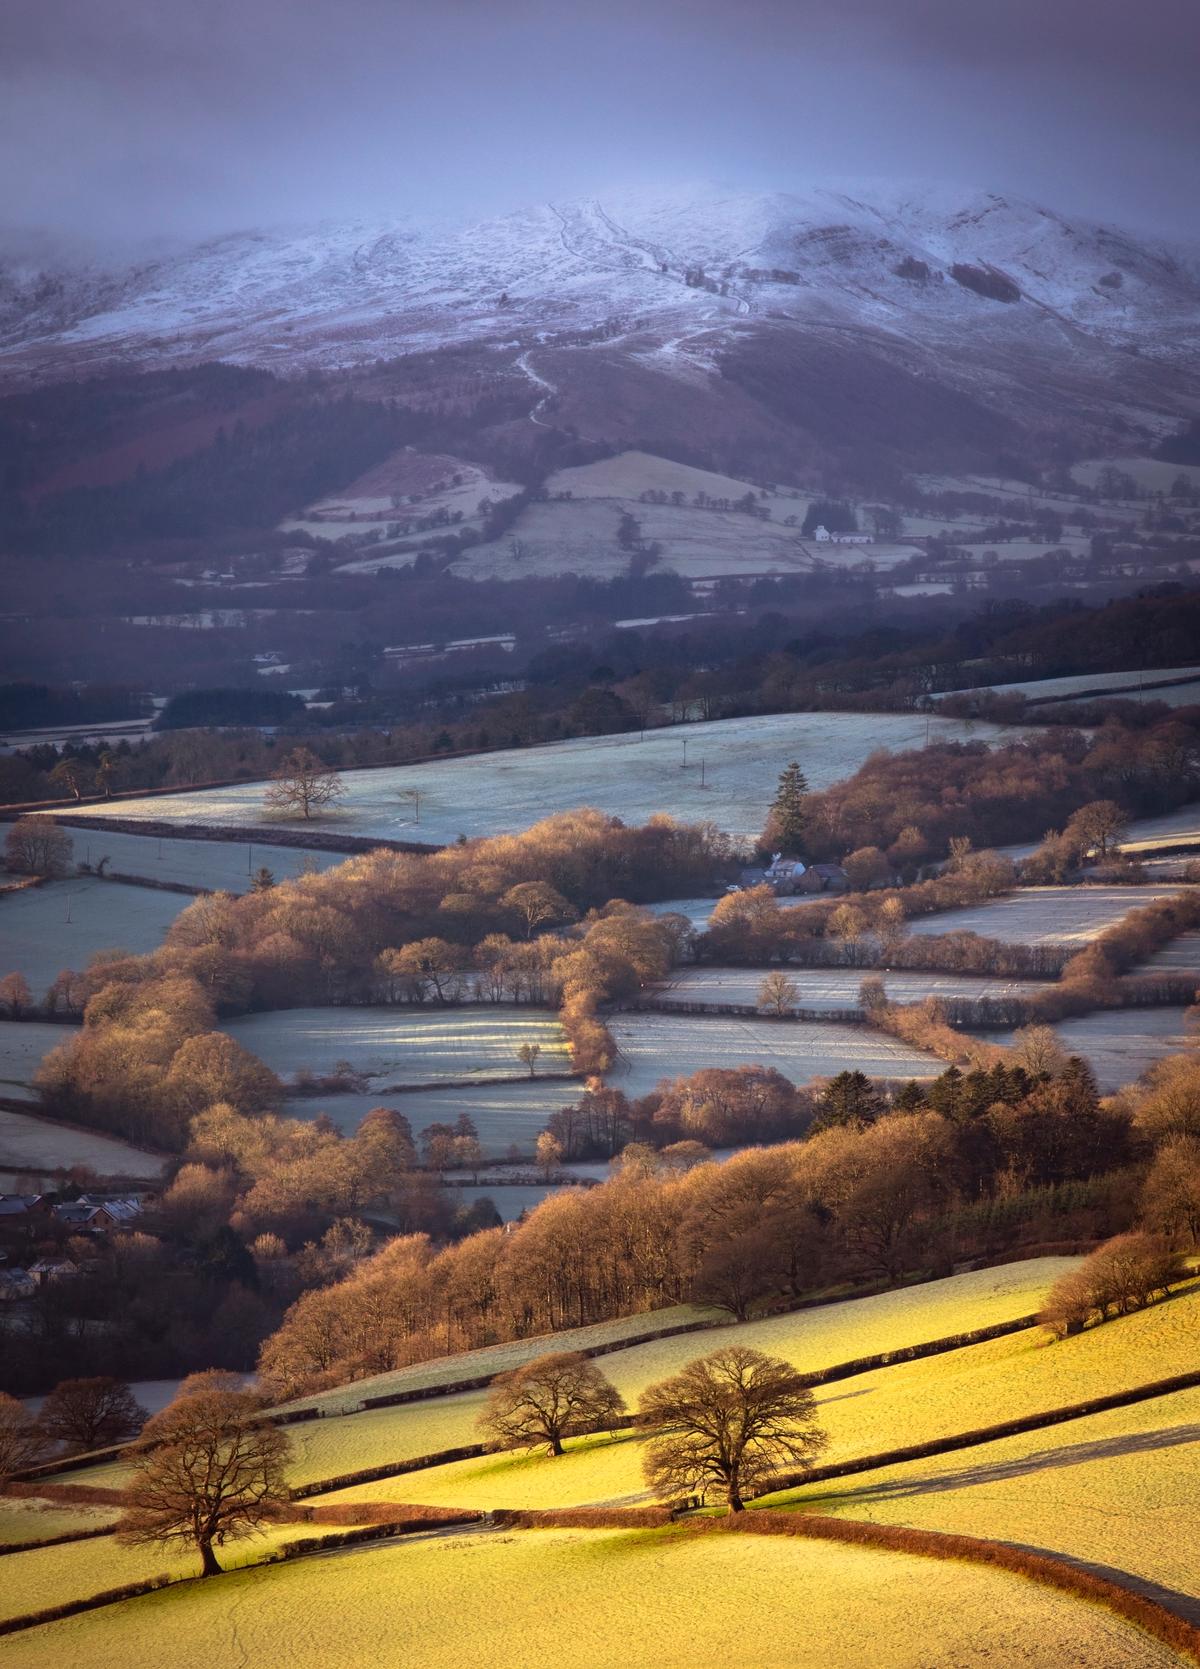 "Brecon in Winter" by Will Davies. (Courtesy of Will Davies/<a href="https://www.lpoty.co.uk/">Landscape Photographer of the Year</a>)